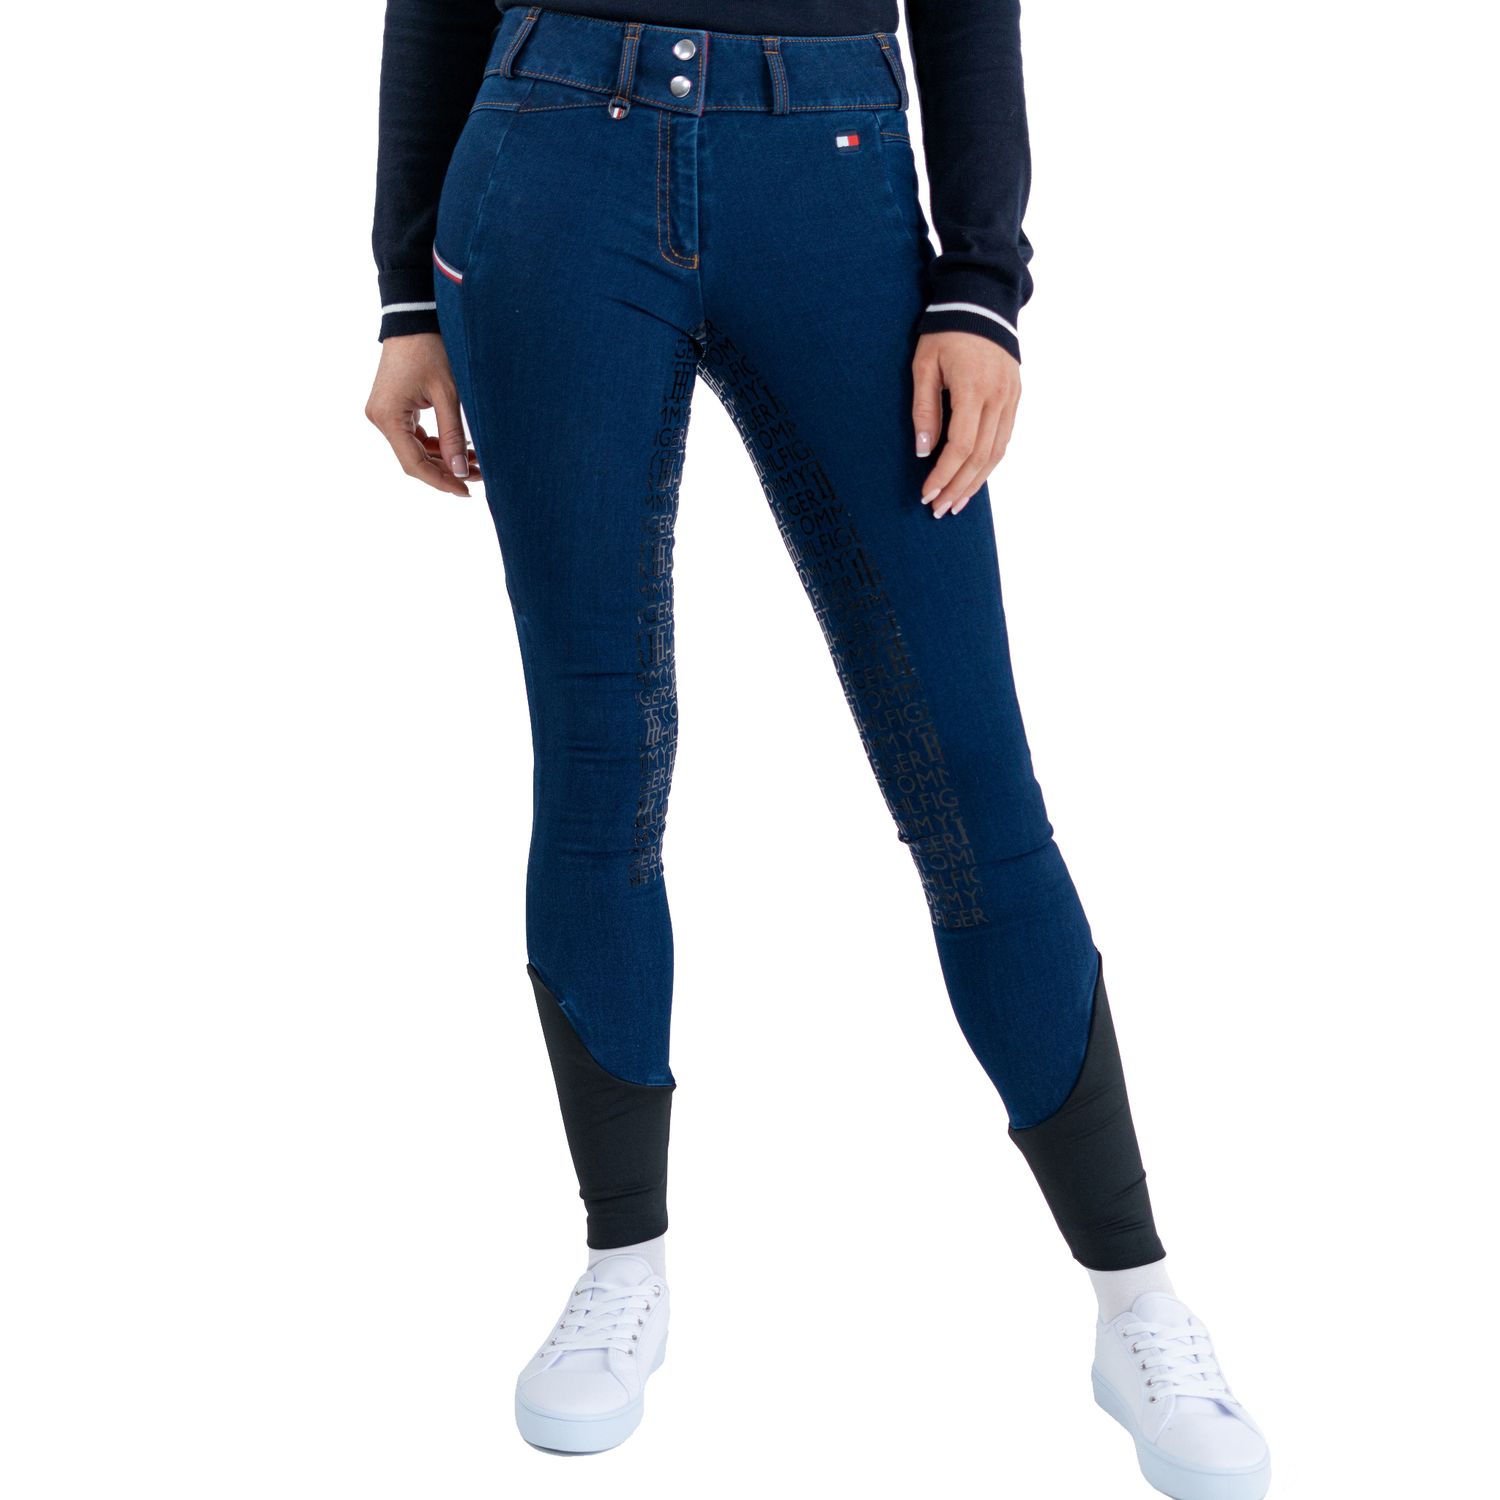 Tommy Hilfiger Equestrian Jeans Style Vollbesatz Reithose Damen von Tommy Hilfiger Equestrian